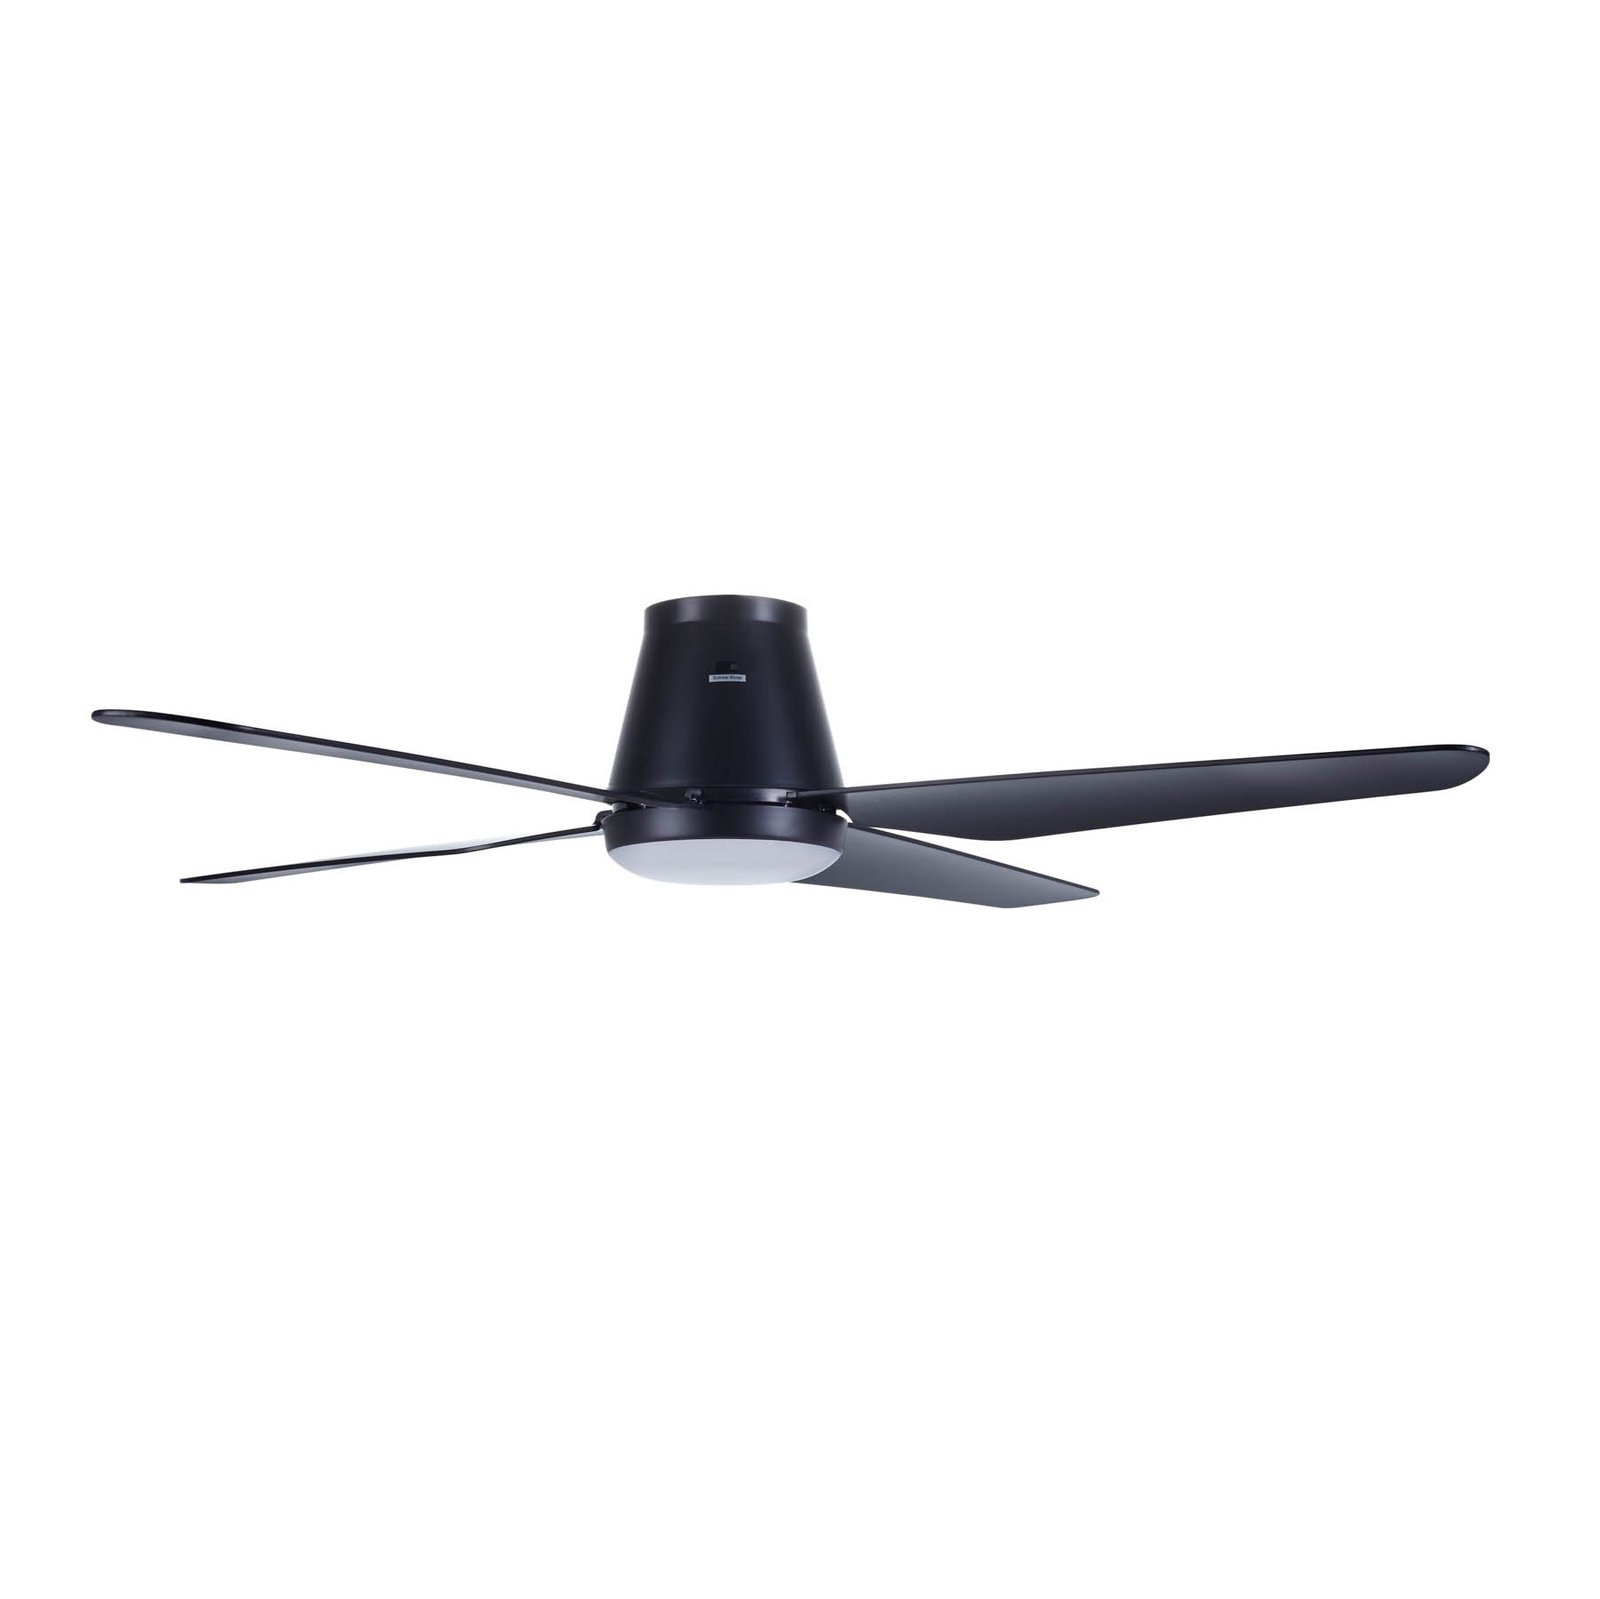 Aria ceiling fan with LED lighting, black